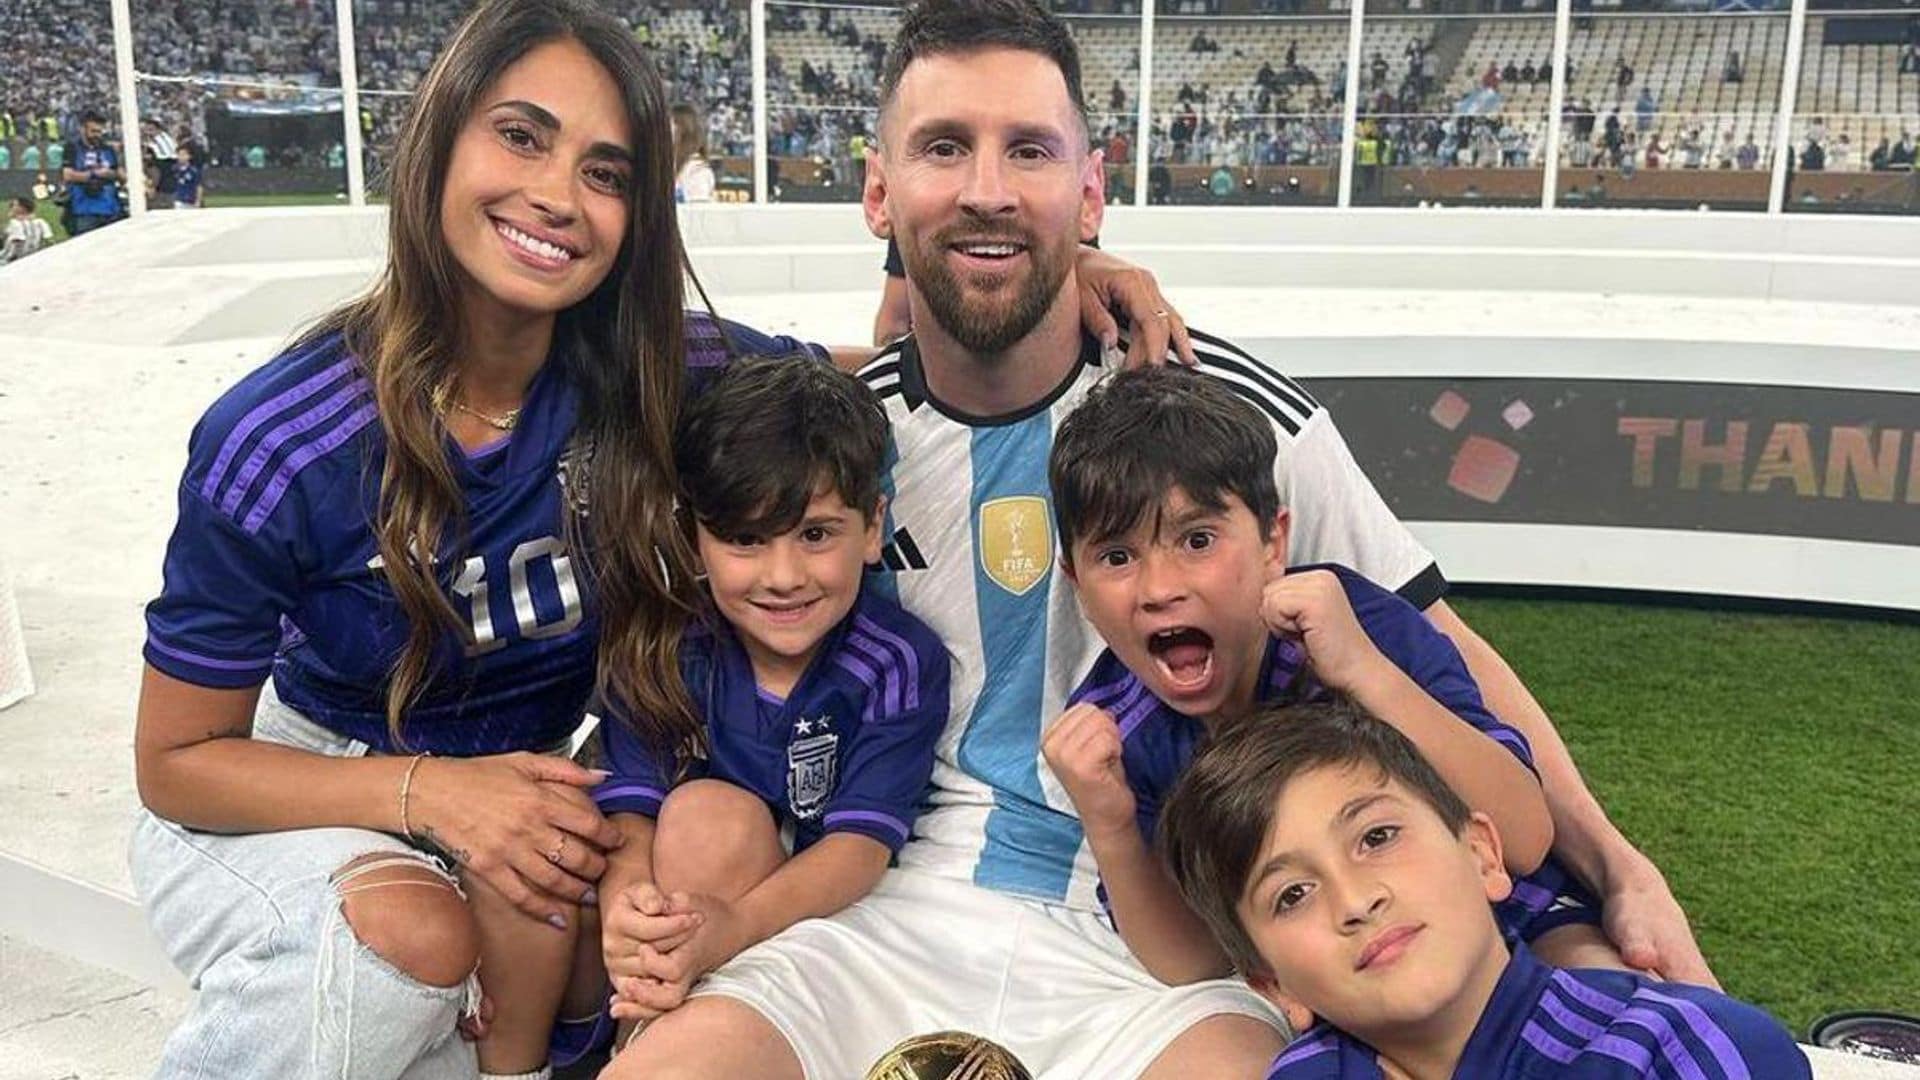 Messi's oldest son Thiago reveals which team he would like to play for in his first interview